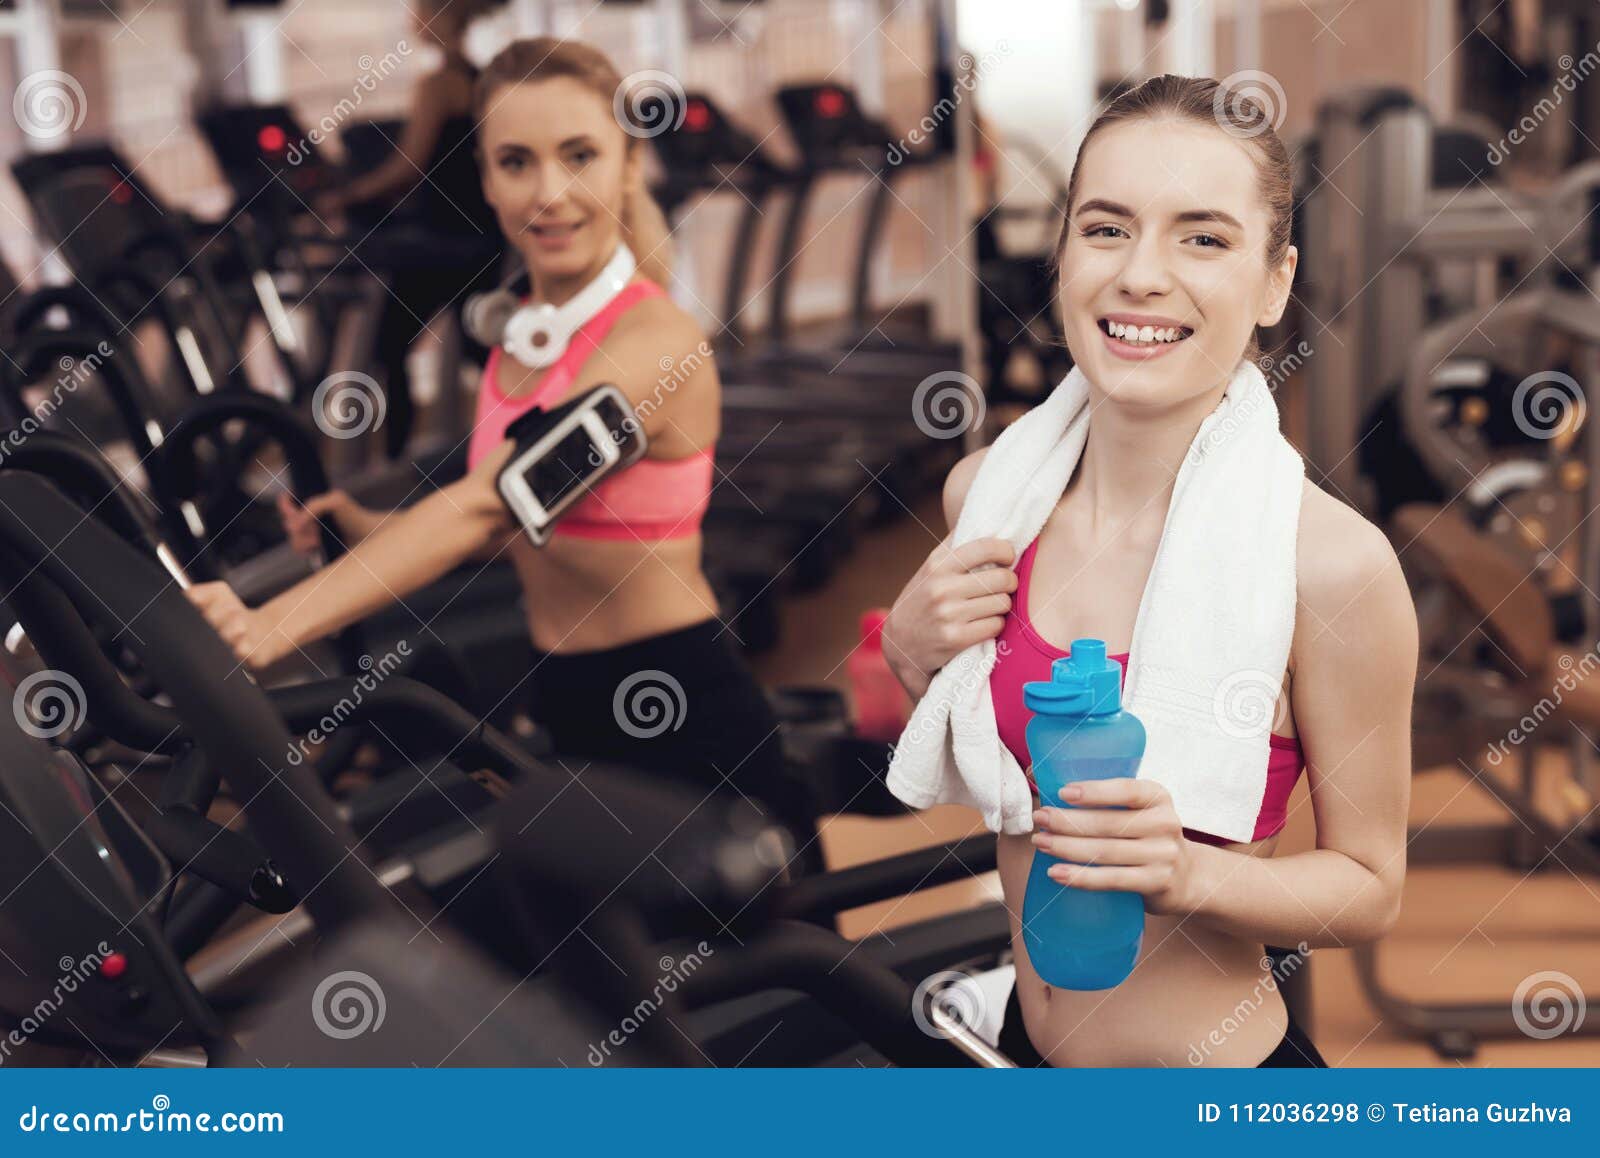 Mother and Daughter Drinking Water on Treadmill in Gym. they Look Happy ...